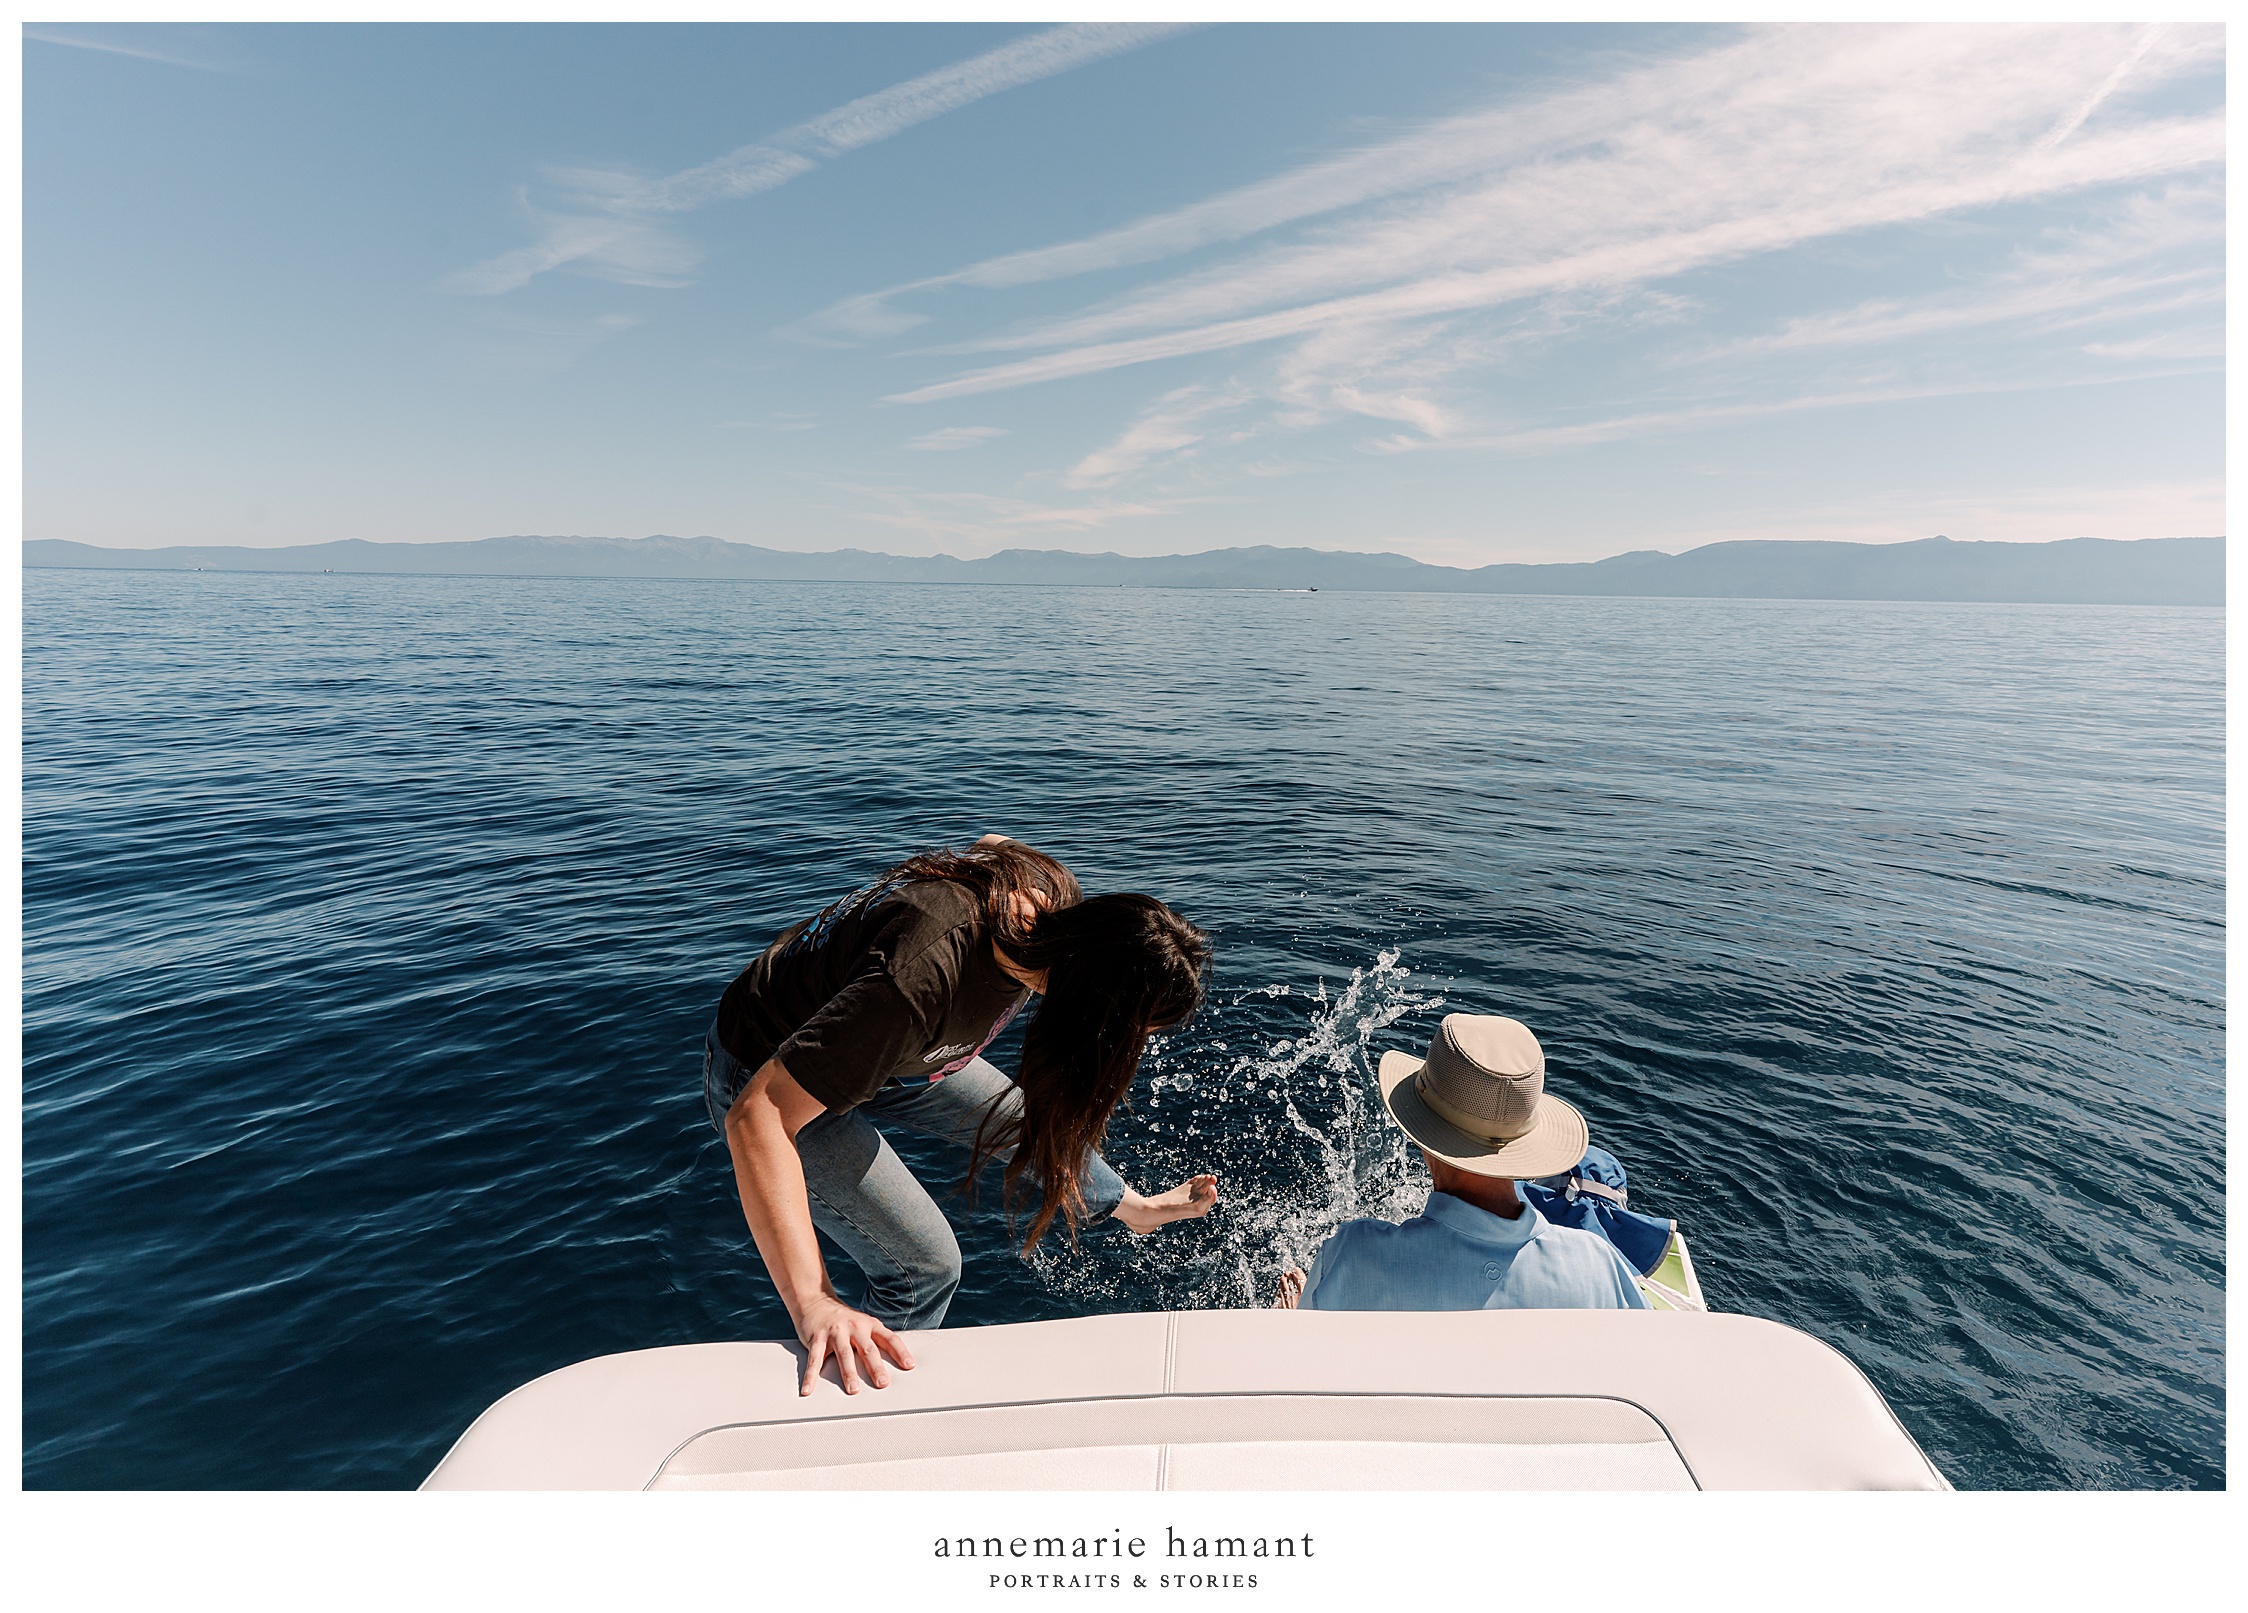  Documentary family photography on Lake Tahoe captures your family vacation and lake life. AnneMarie Hamant is an award winning photographer who travels to document her client’s most important memories.  